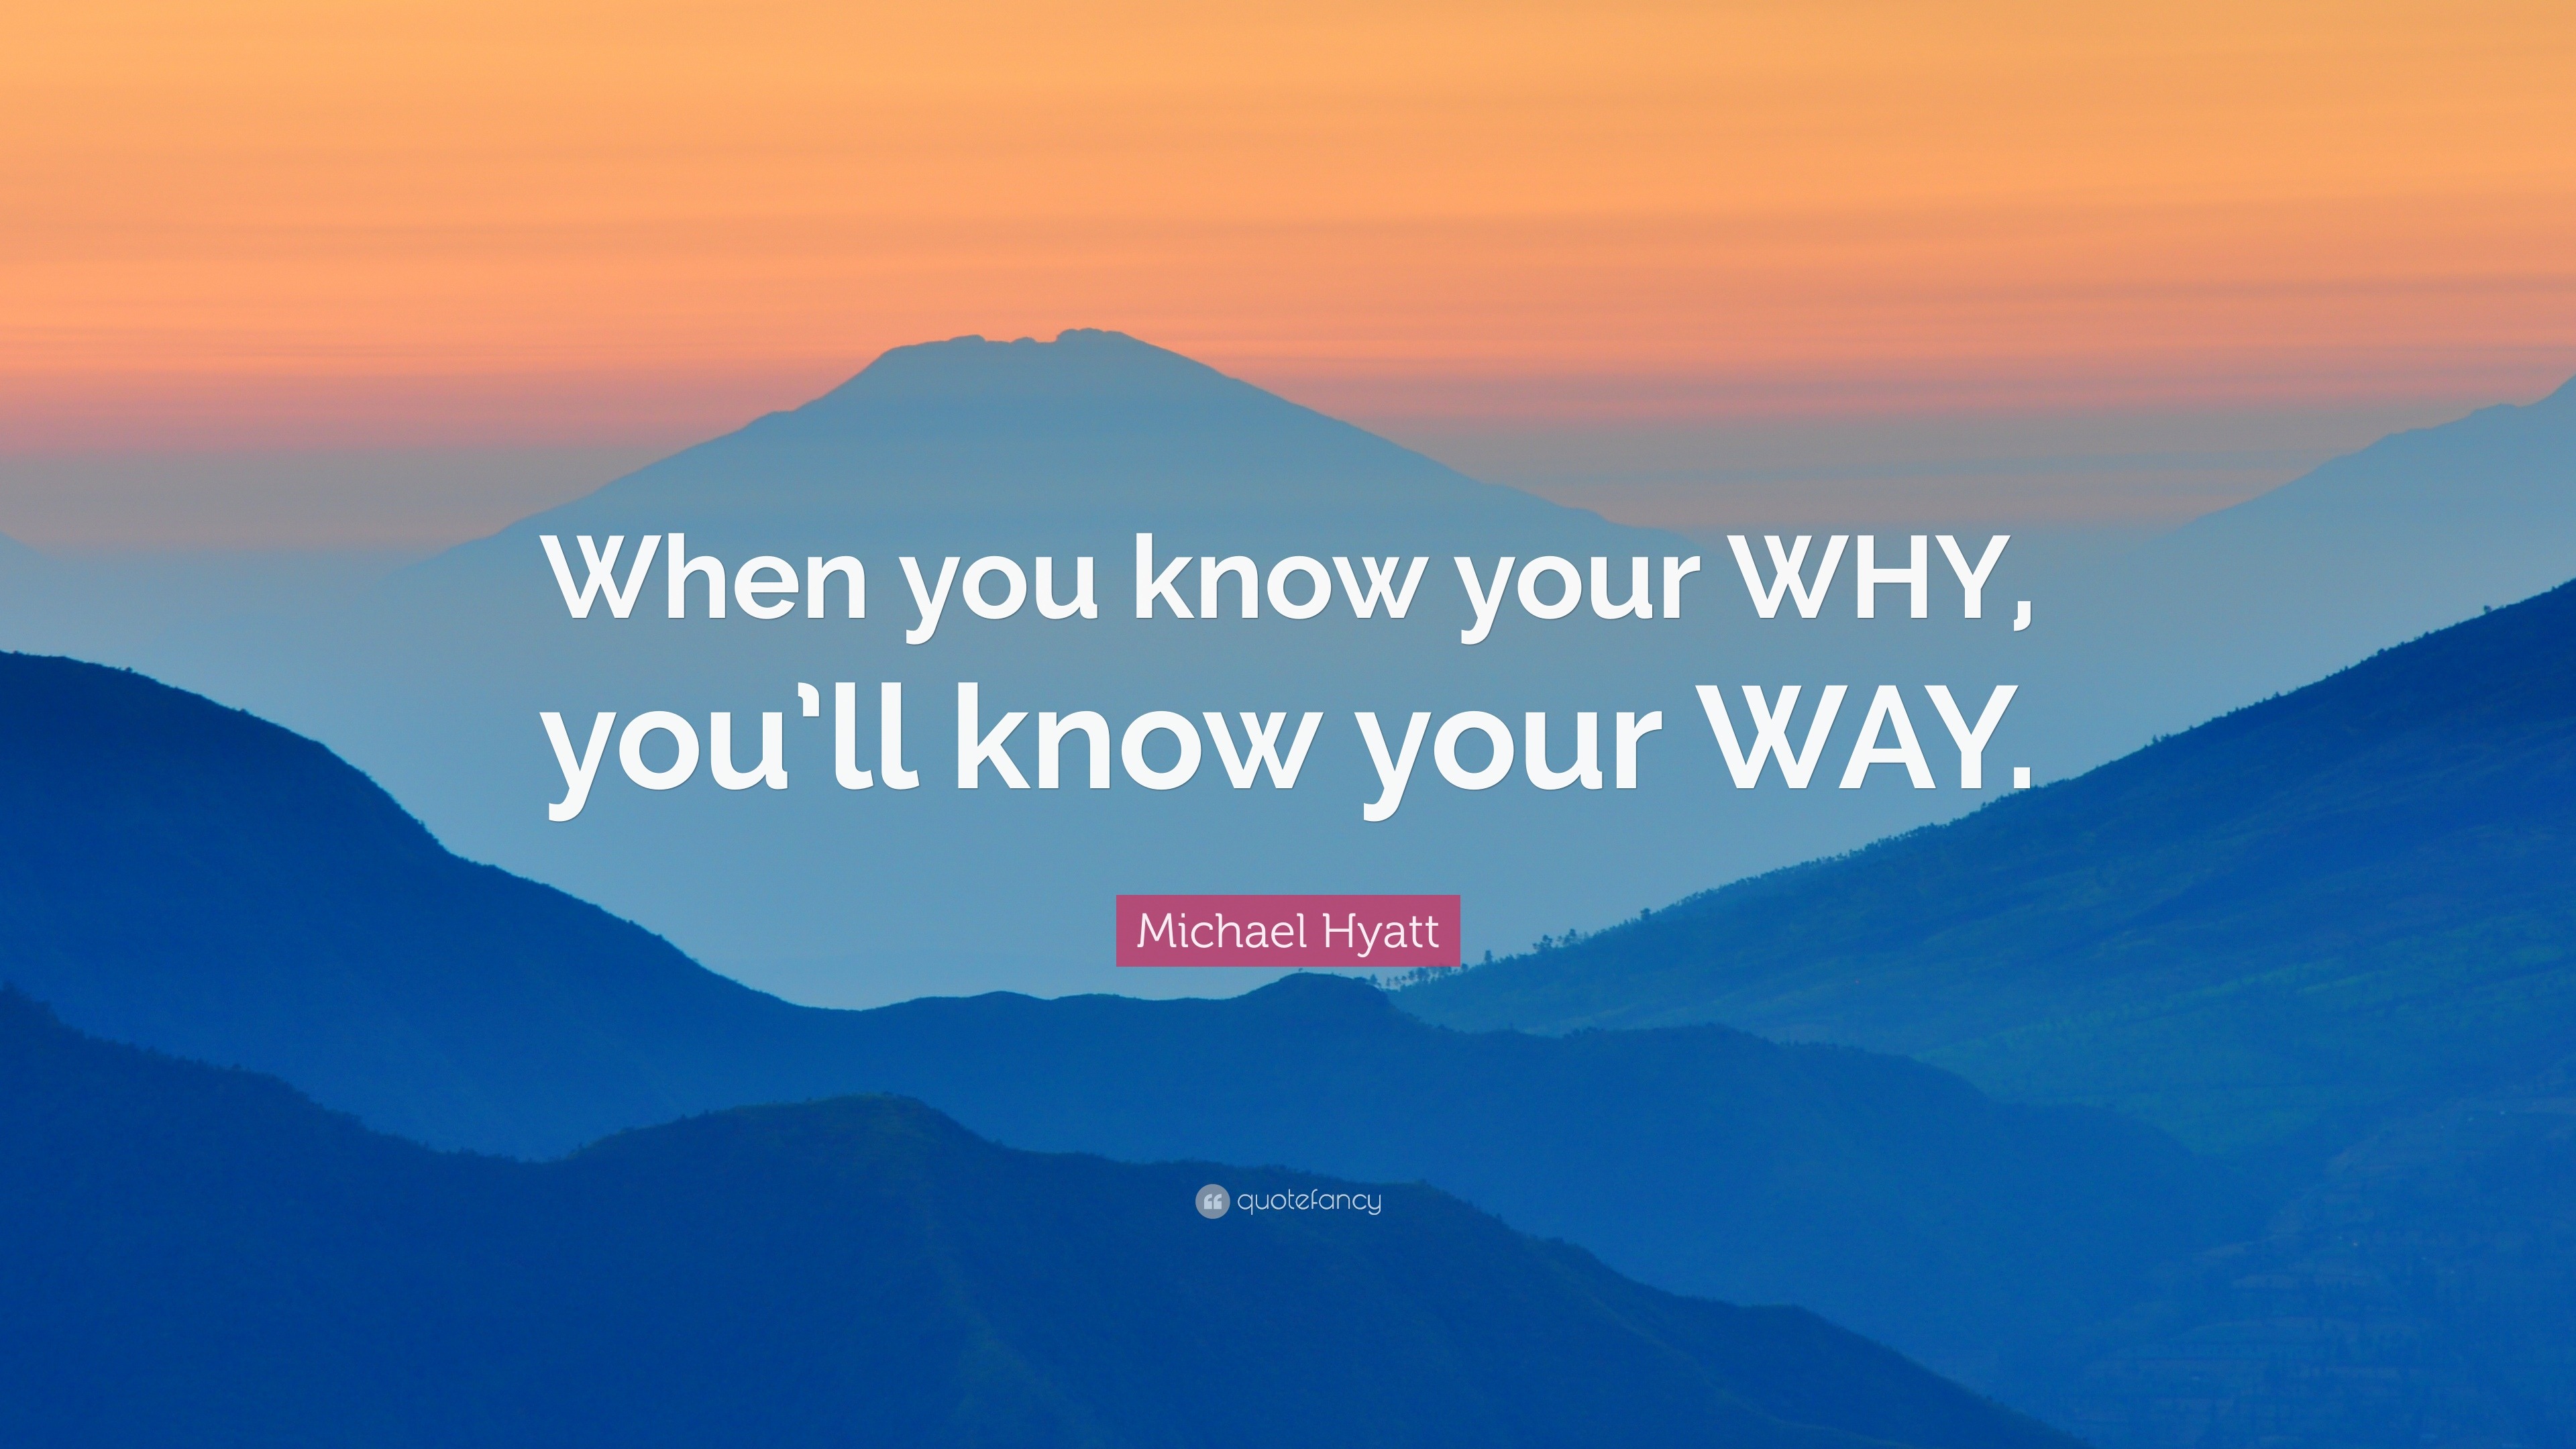 Michael Hyatt Quote: “When You Know Your Why, You’ll Know Your Way.”